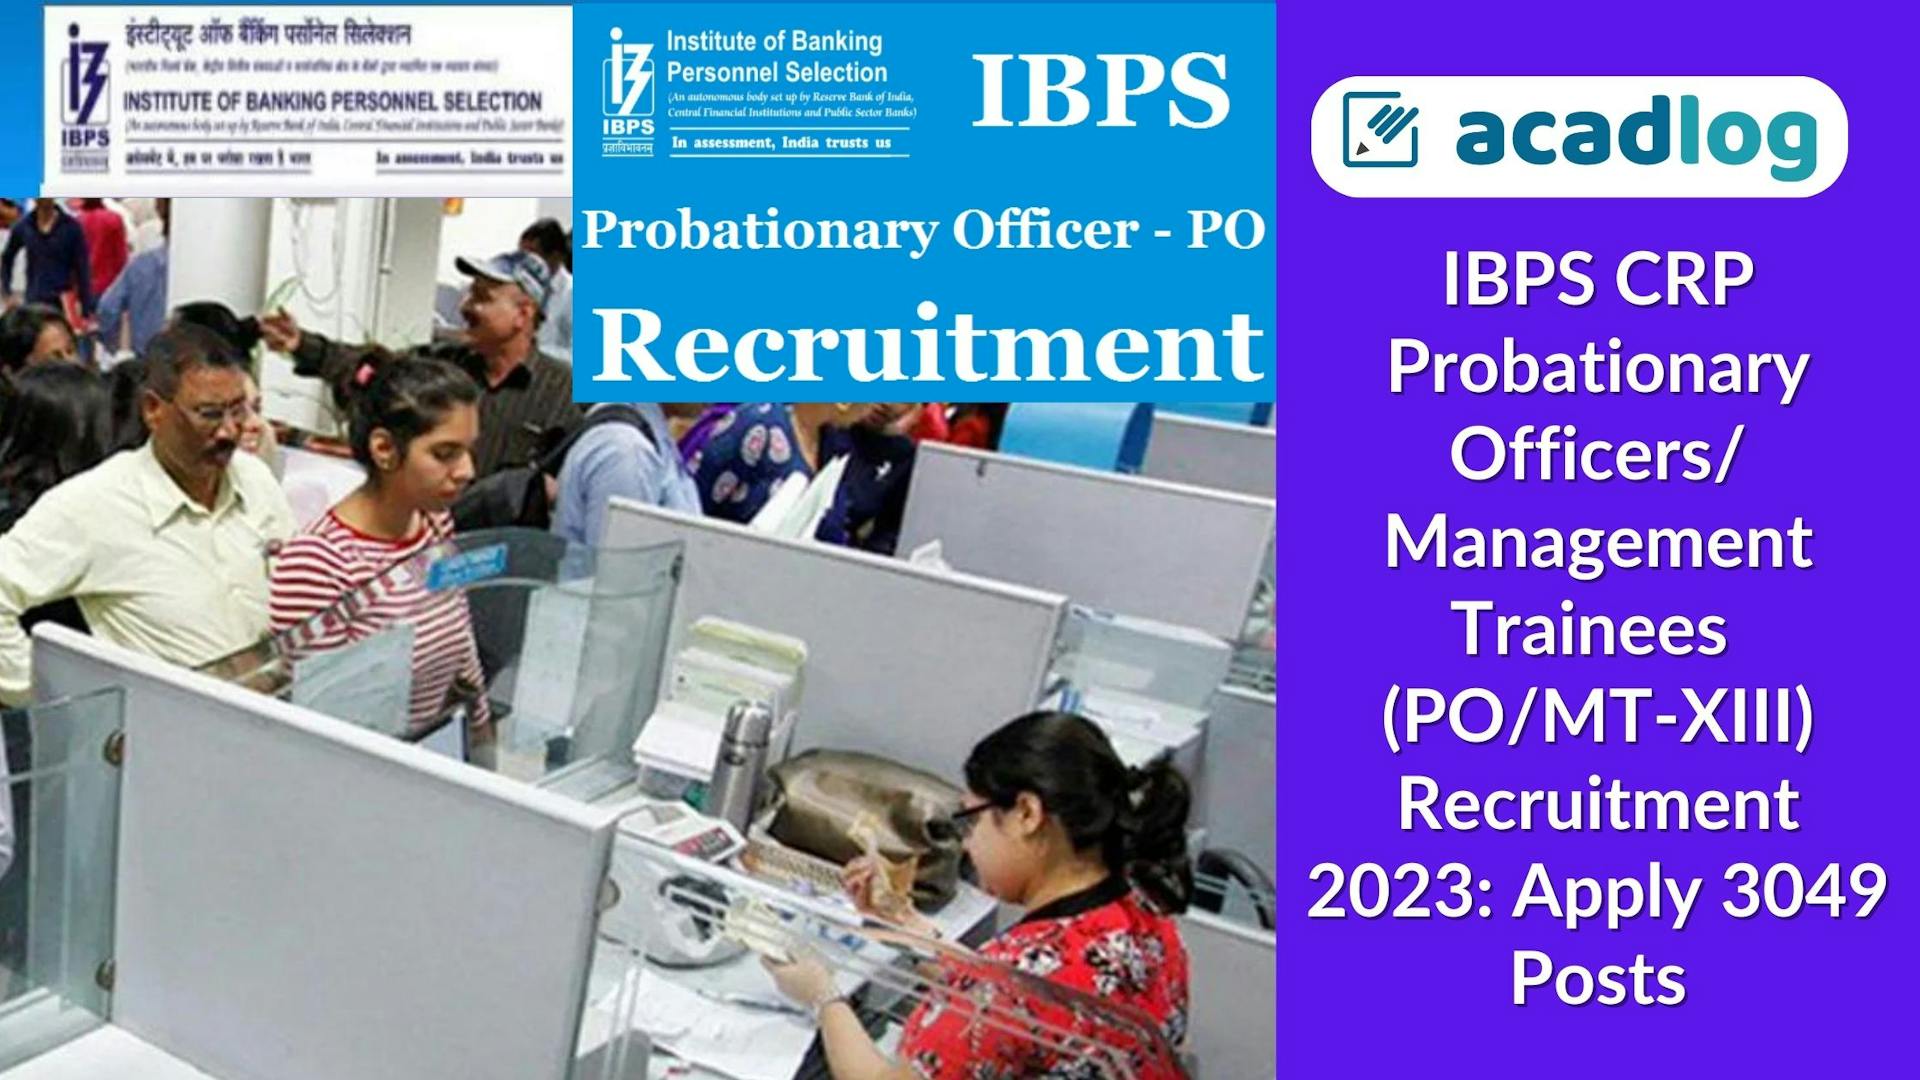 IBPS CRP Probationary Officers/ Management Trainees (PO/MT-XIII) Recruitment 2023: Apply 3049 Posts